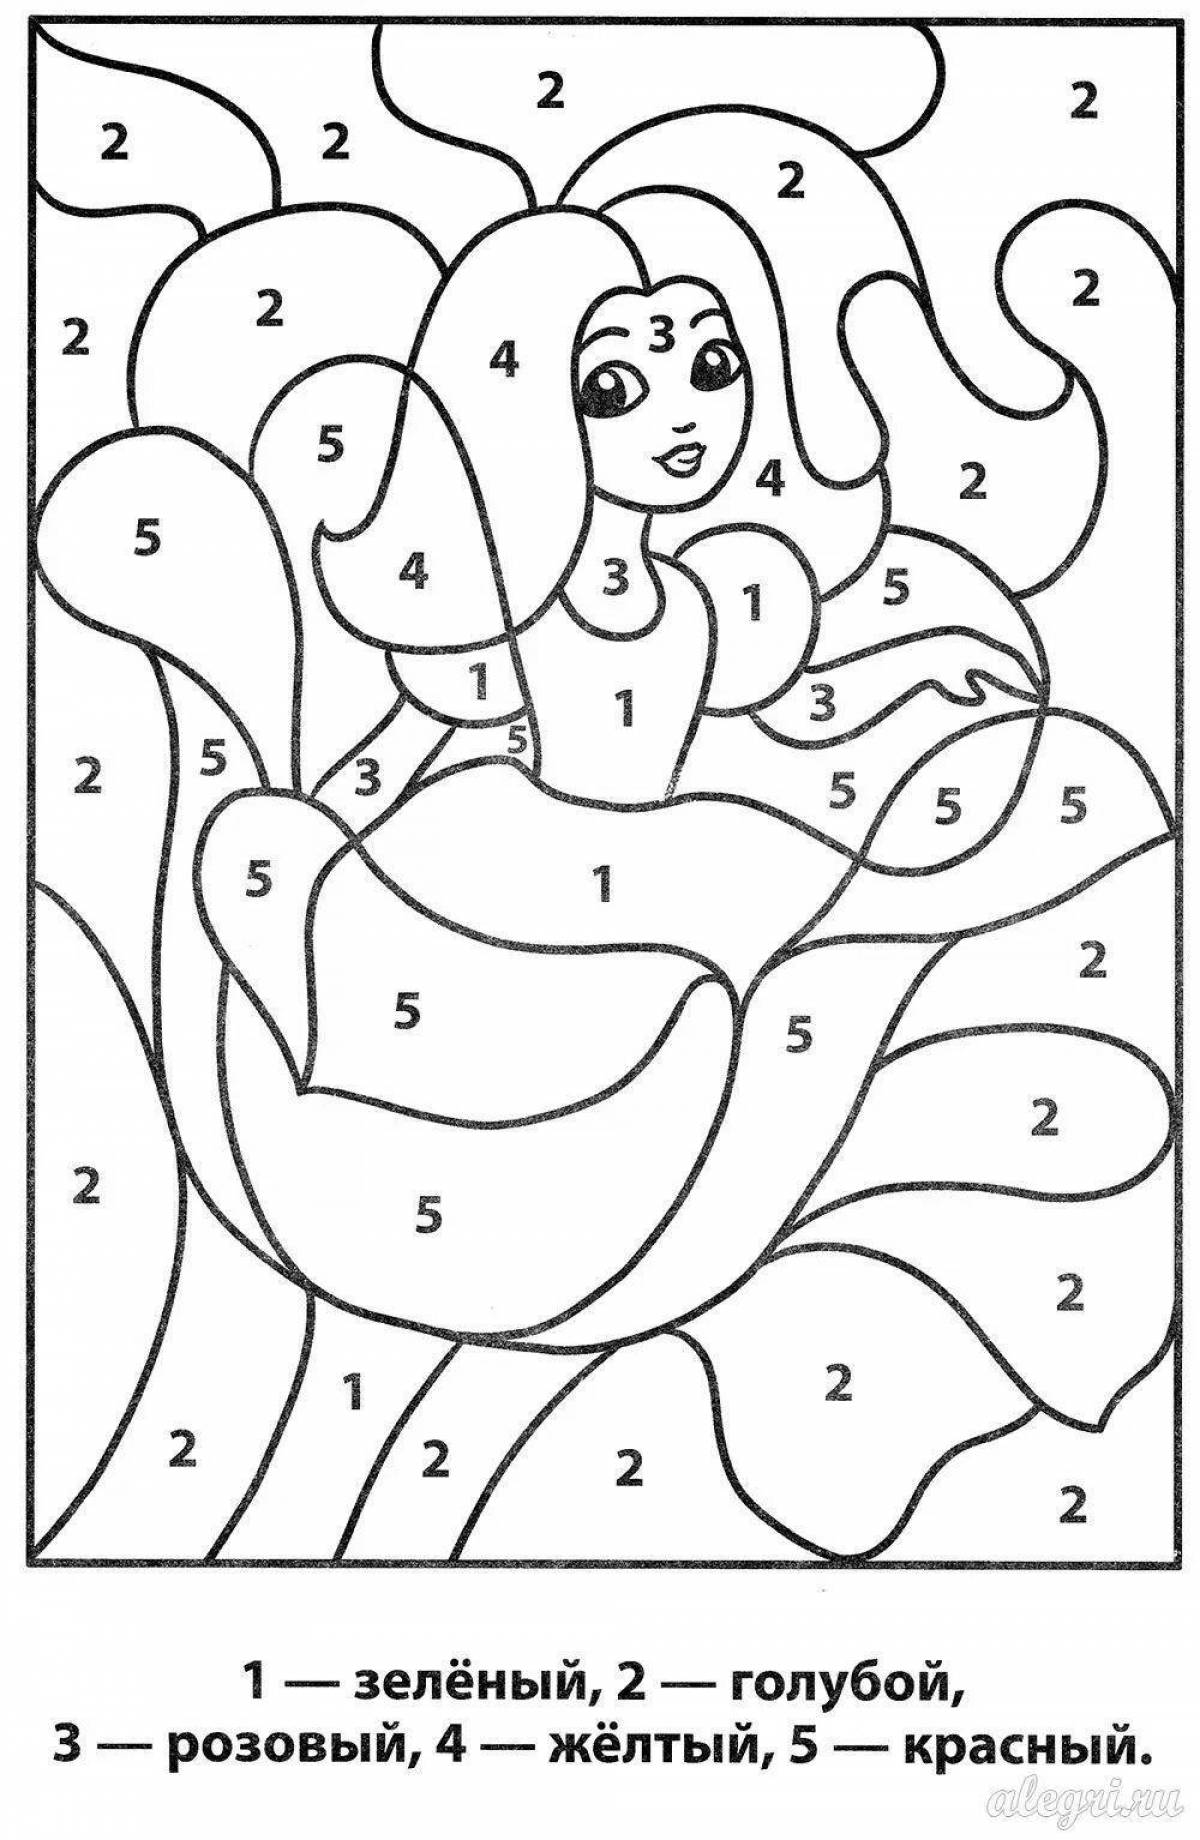 Joyful coloring by numbers for girls 6-7 years old